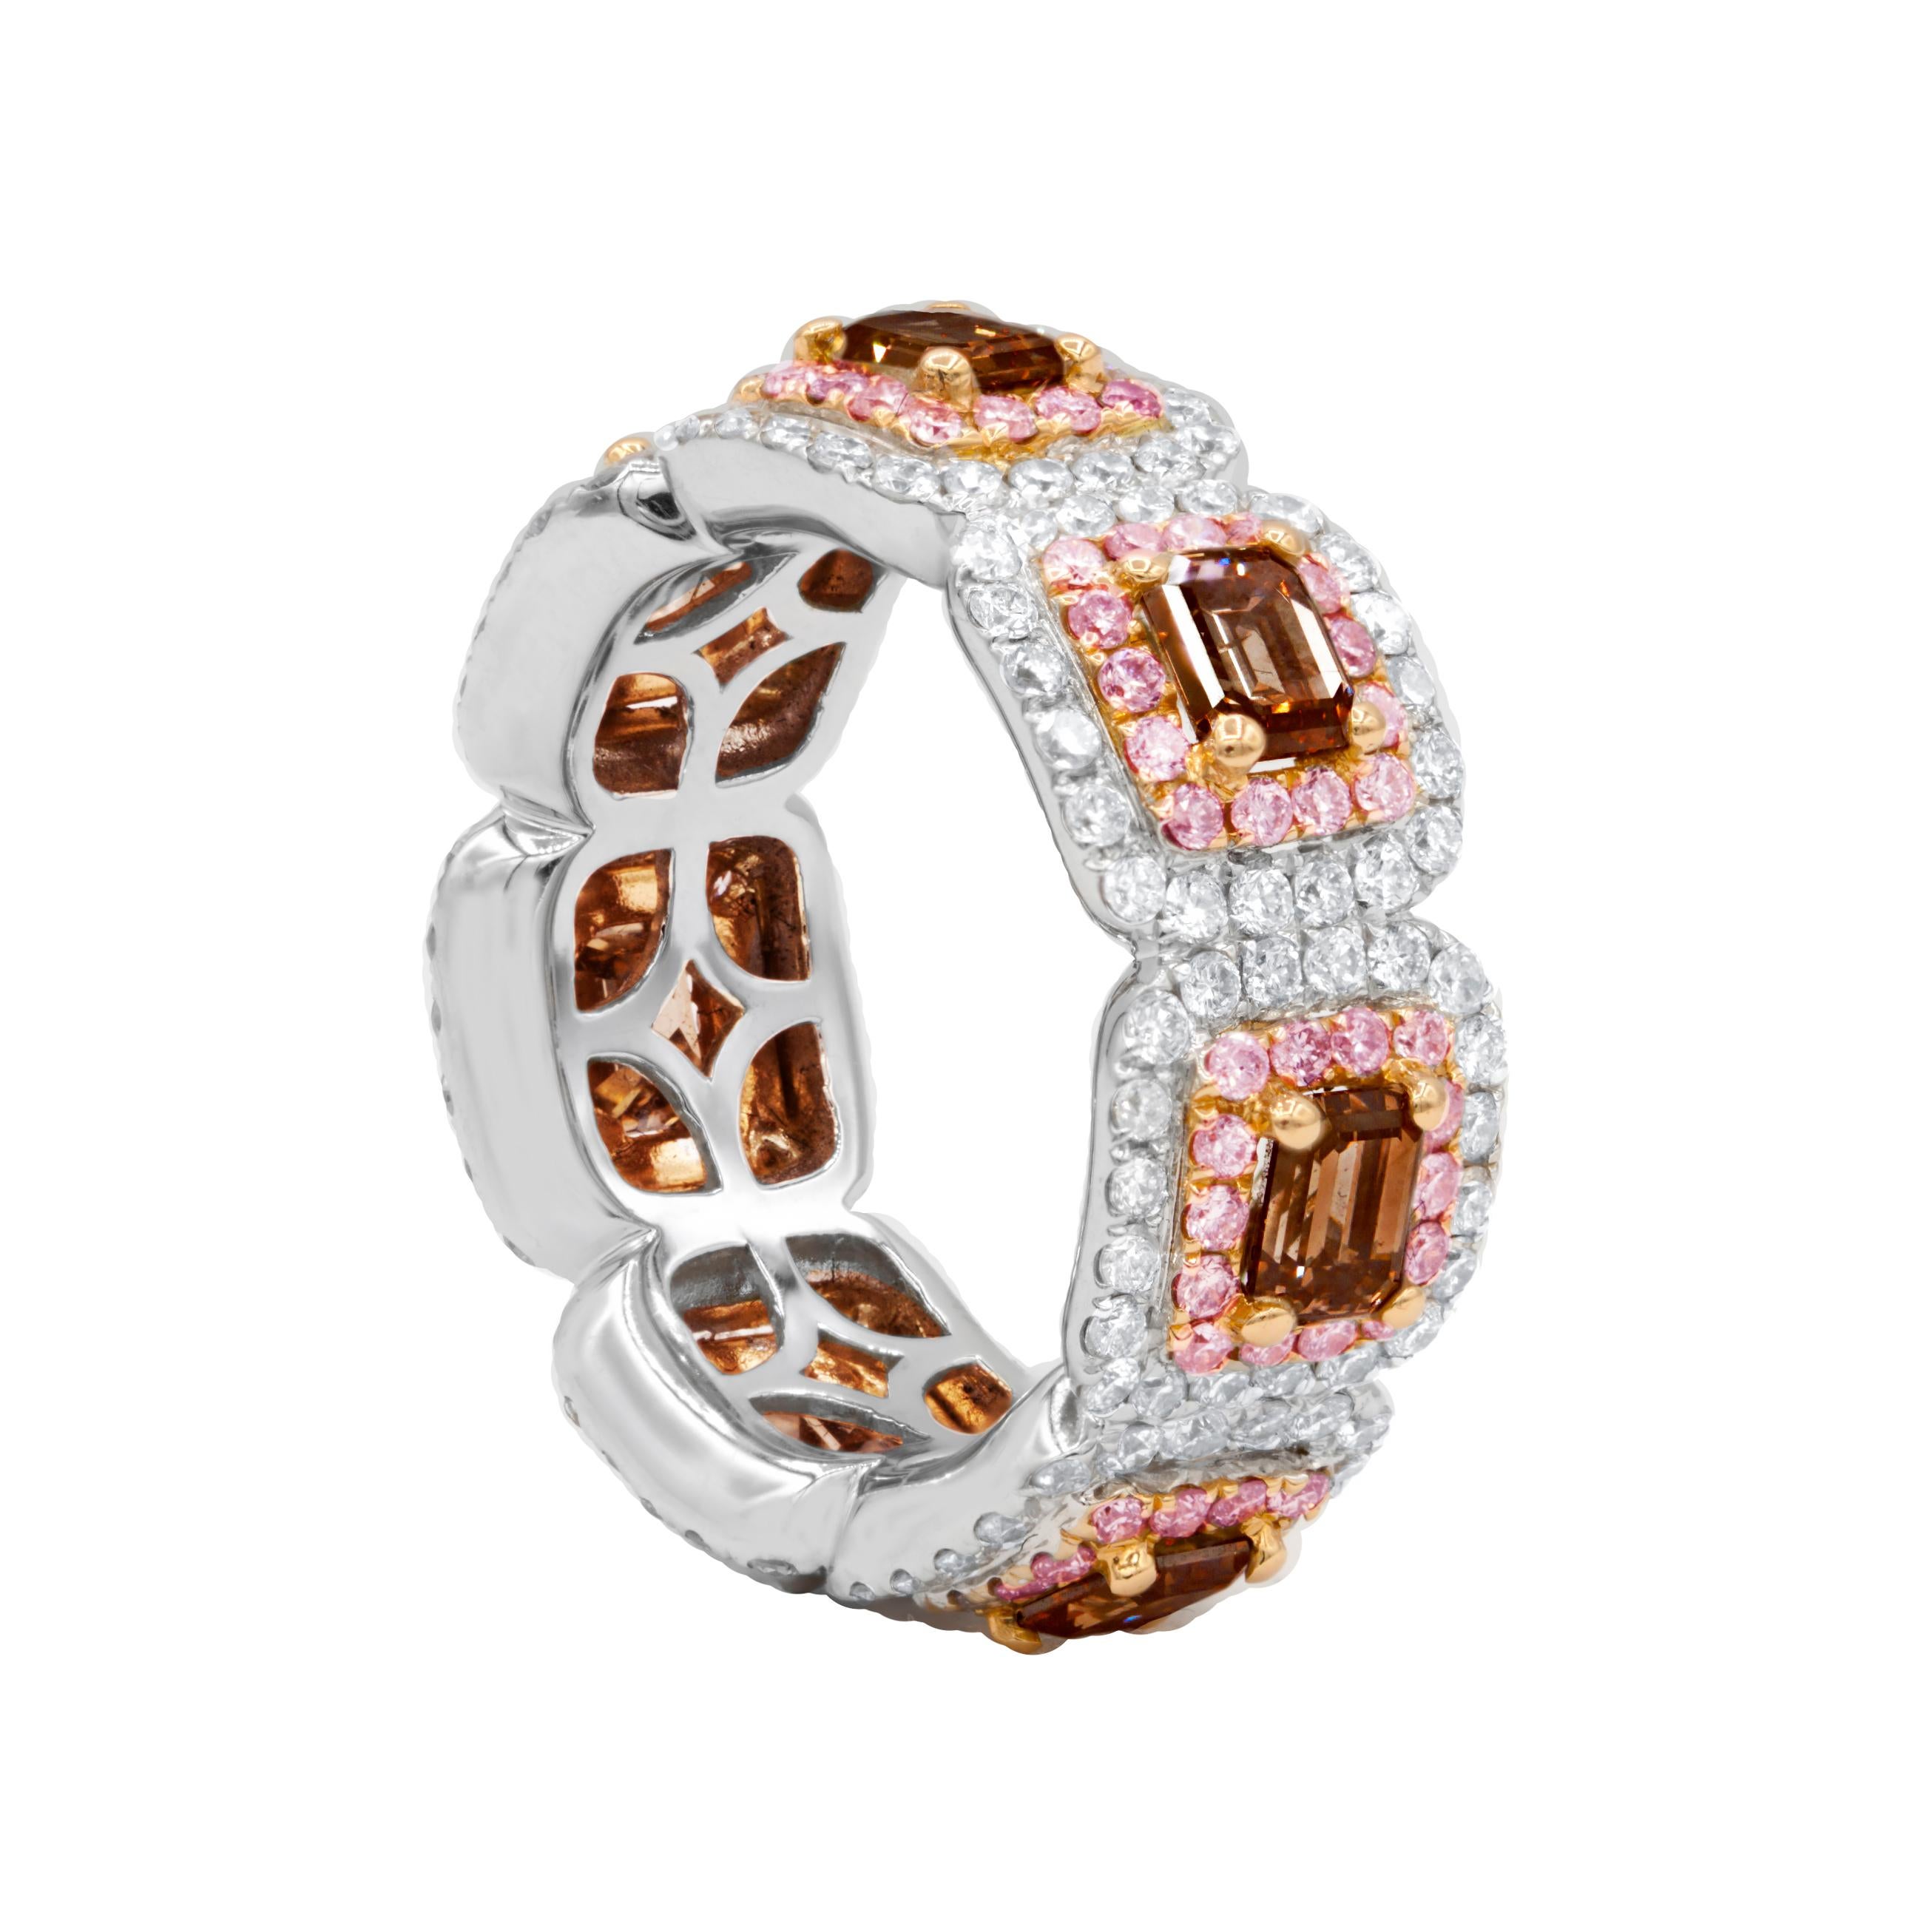 18 kt white and rose gold diamond eternity band containing 4.39 cts tw of diamonds and 3.50 cts of brown diamonds  (7 emerald cut brown diamonds).
Diana M. is a leading supplier of top-quality fine jewelry for over 35 years.
Diana M is one-stop shop